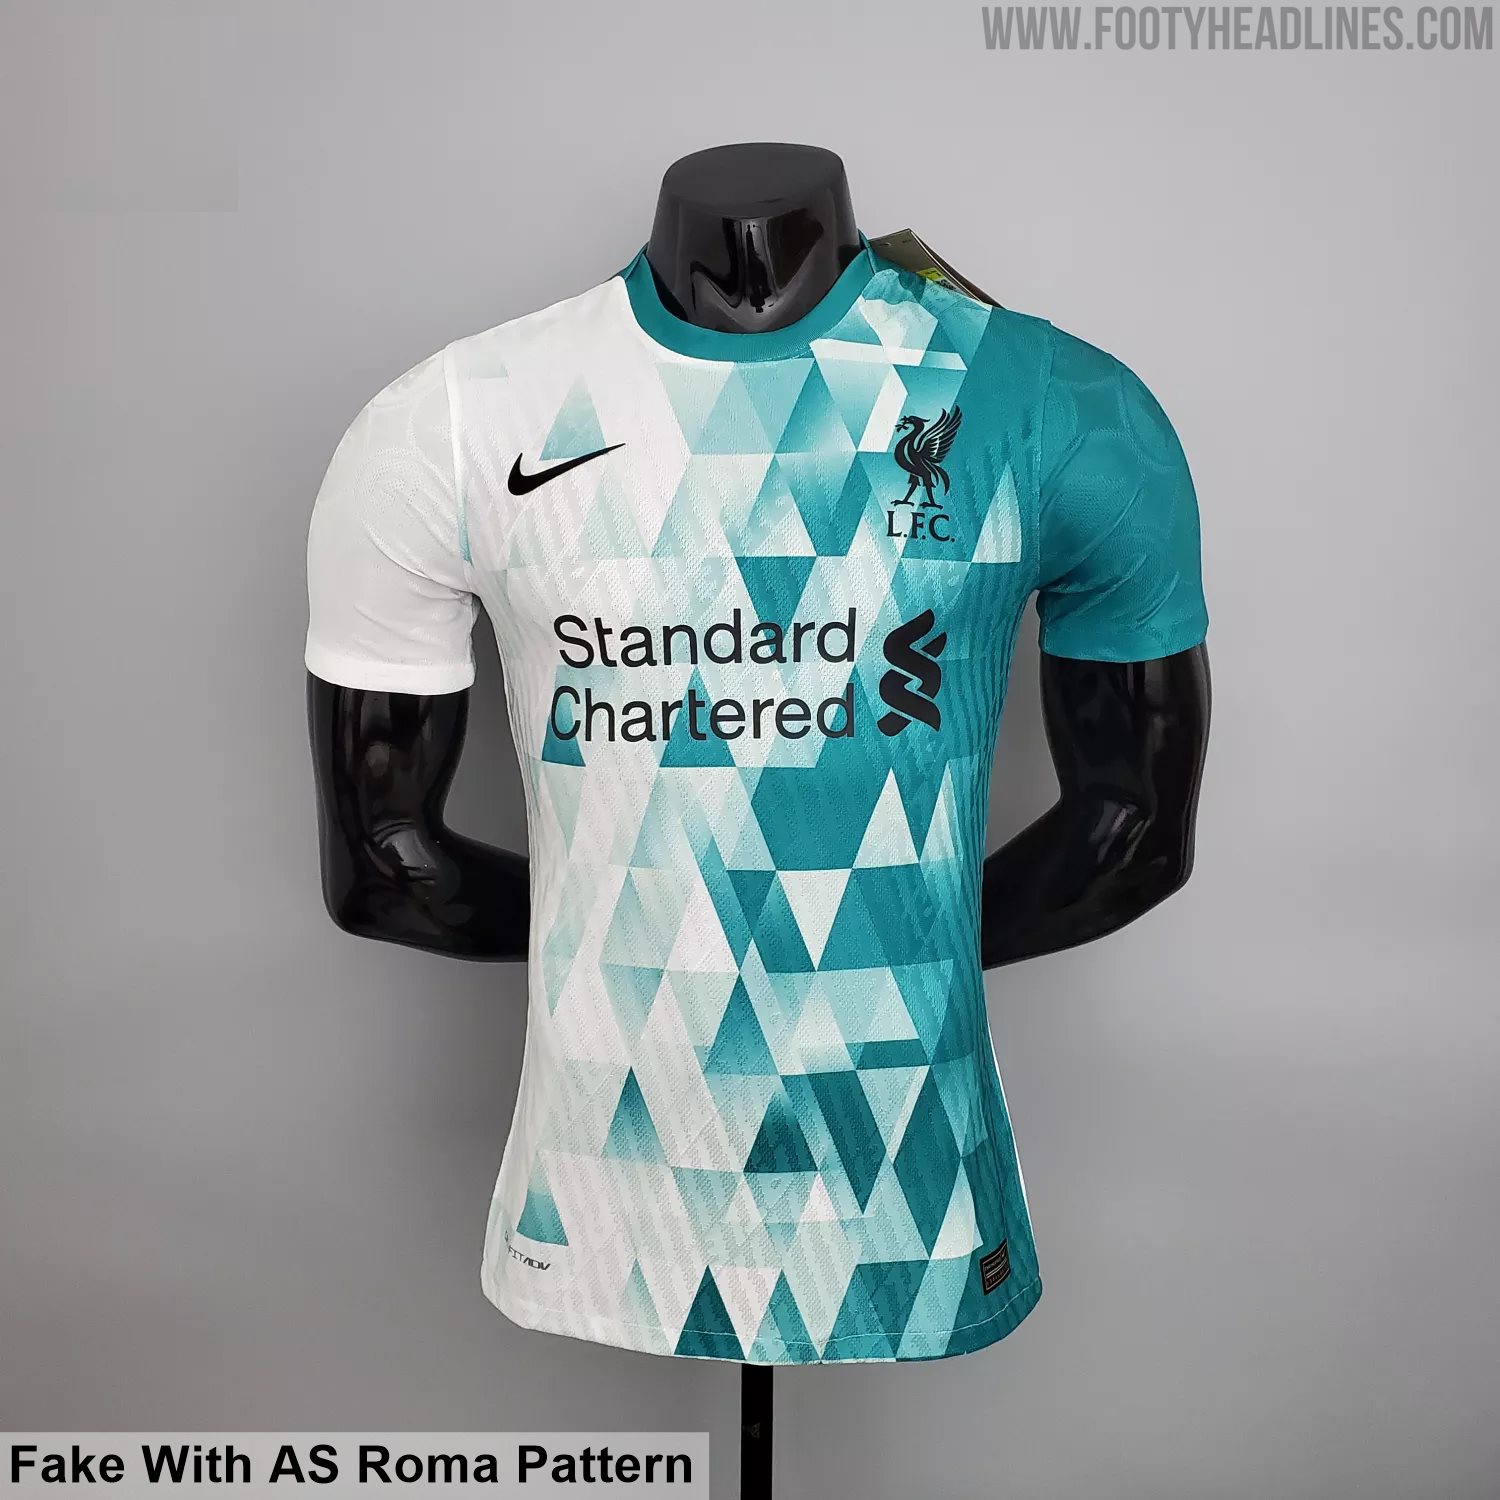 Never-Released Special Nike Liverpool 21-22 Kit Leaked? - Footy